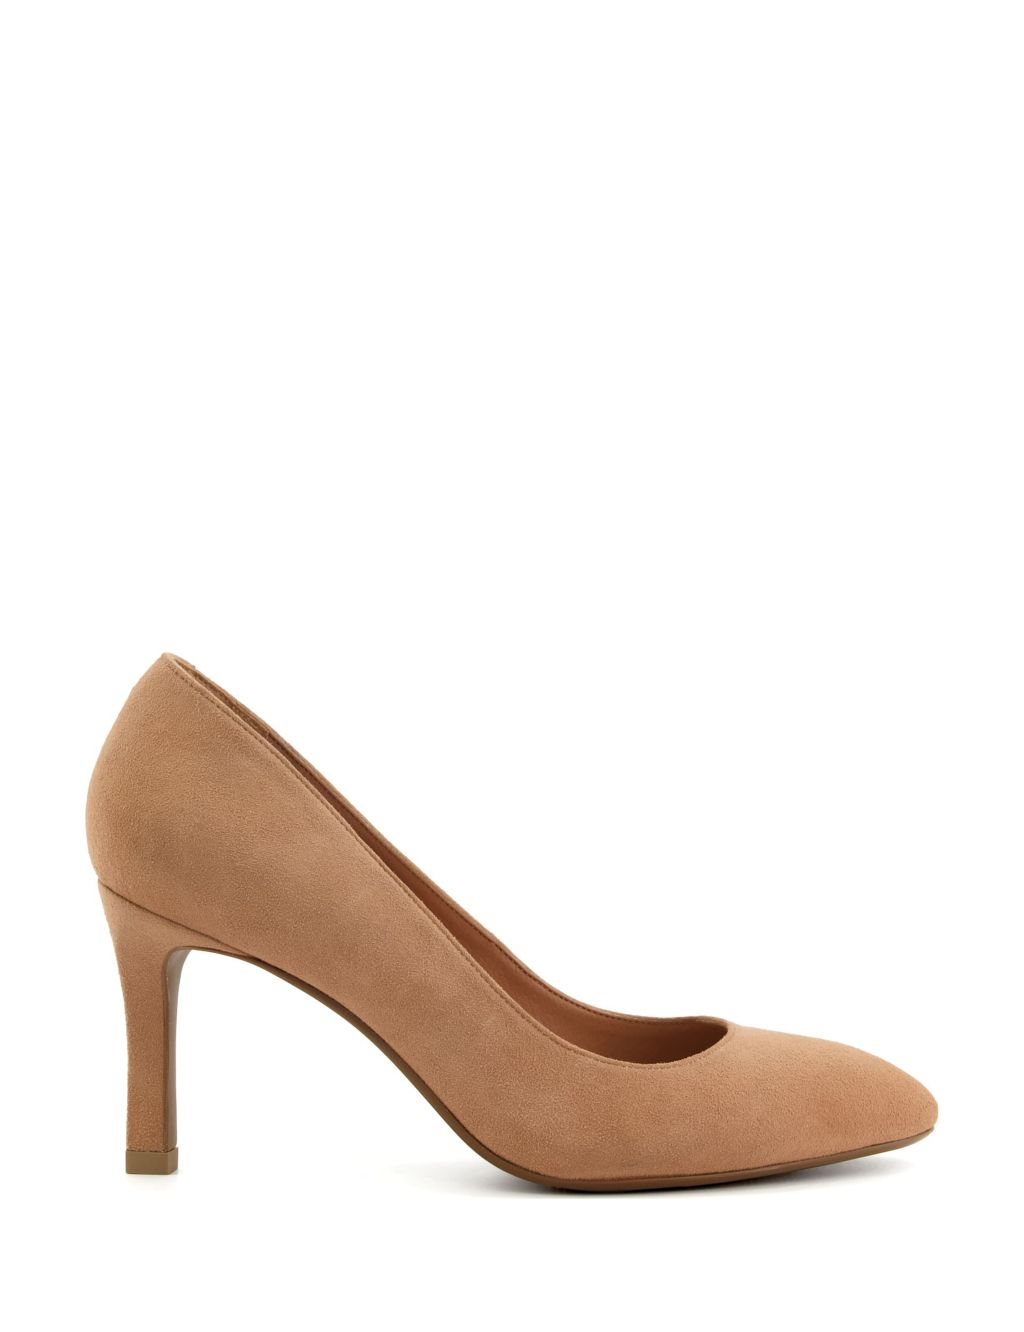 Leather Stiletto Heel Court Shoes